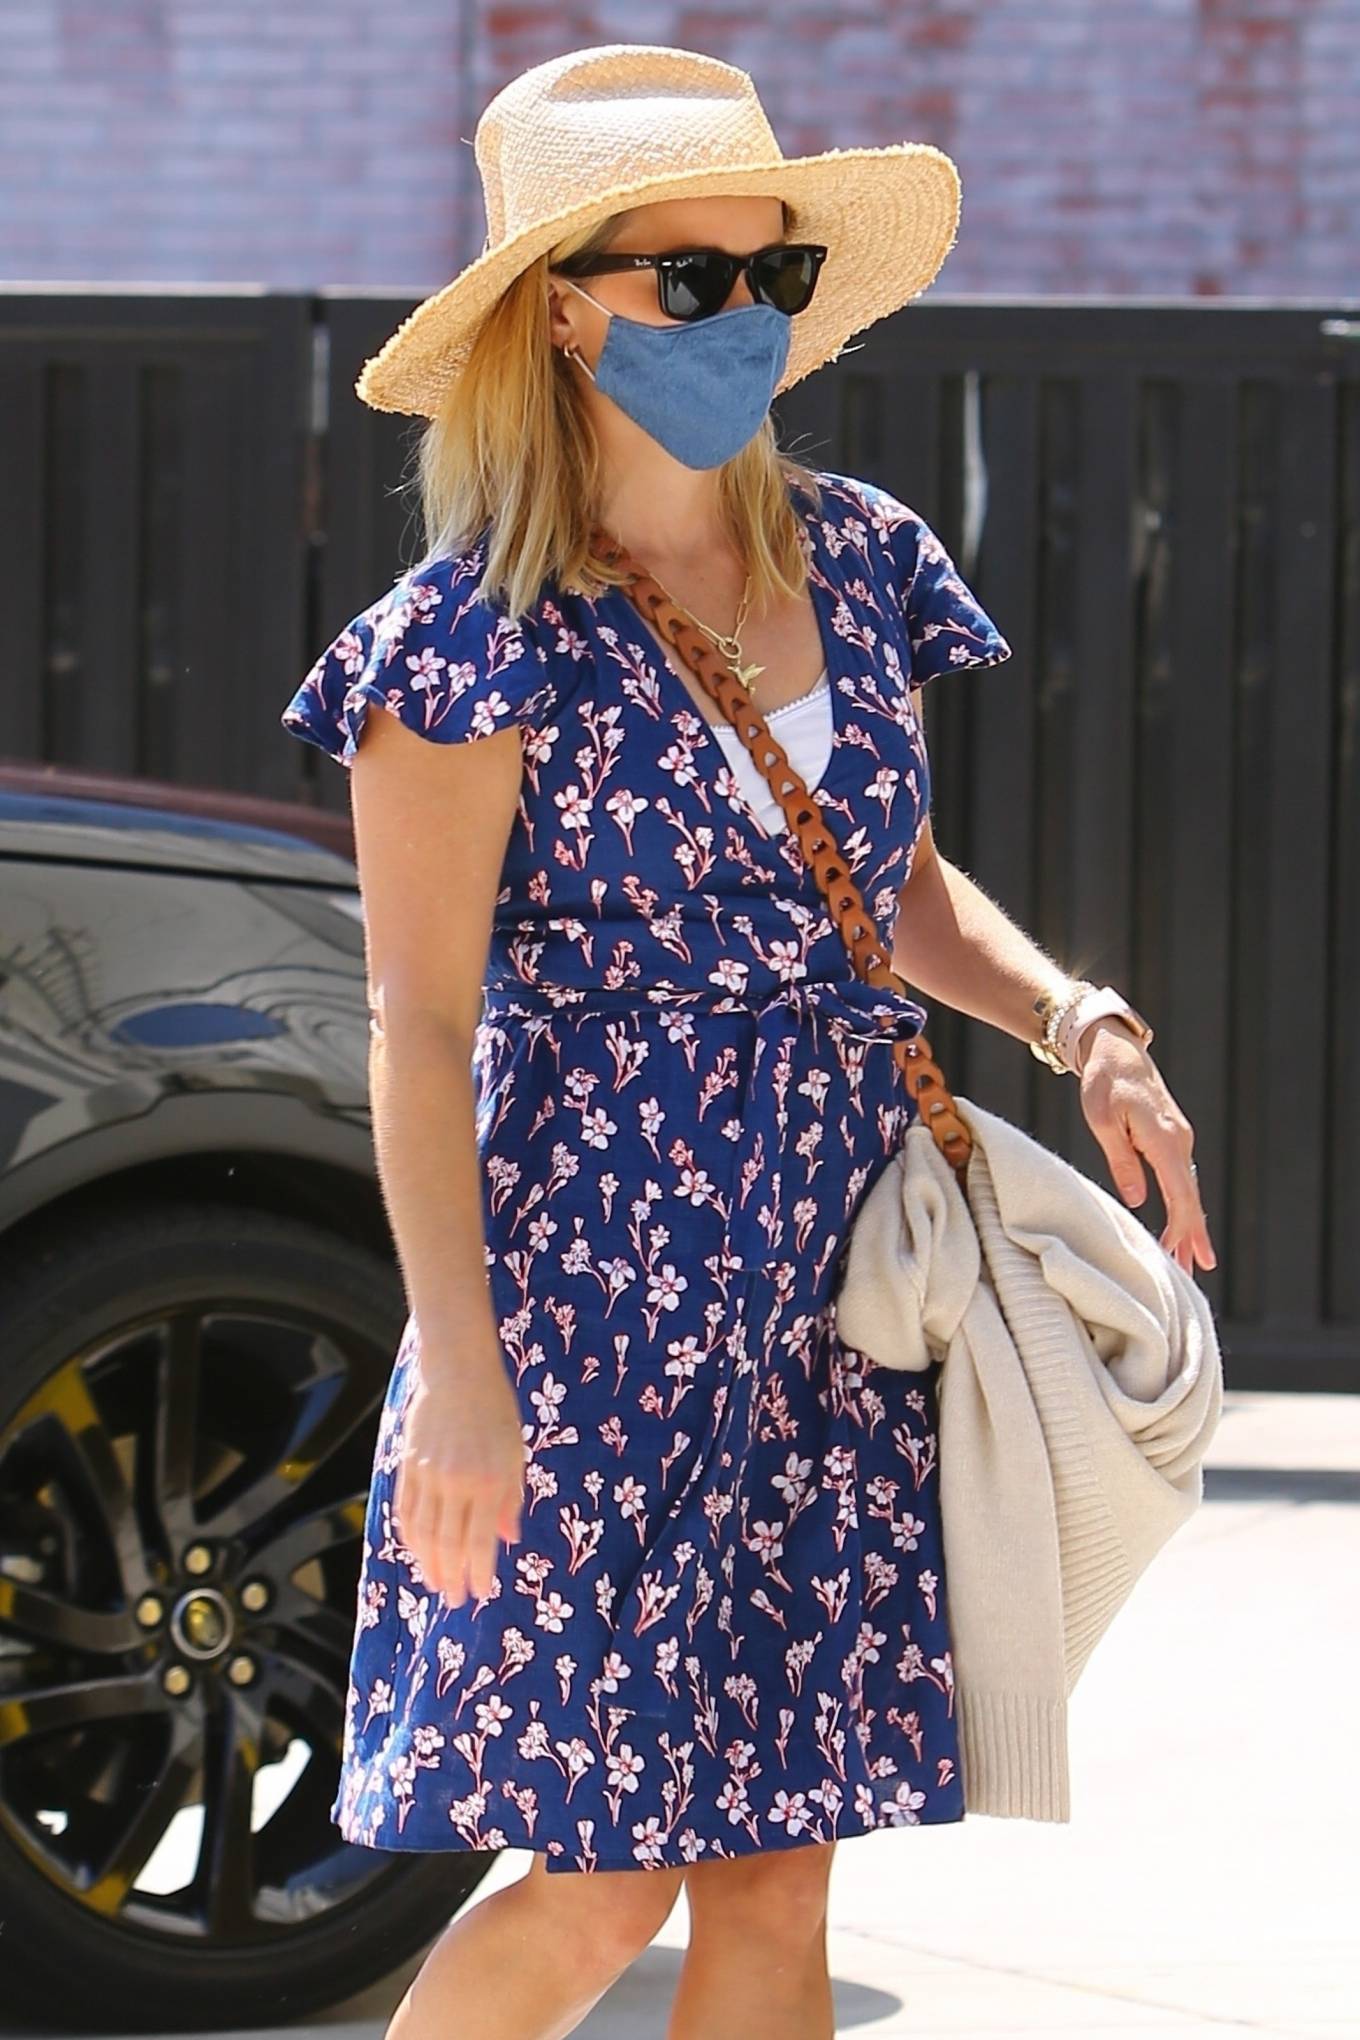 Reese Witherspoon - Cute in a blue summer dress at a skincare spa in Brentwood